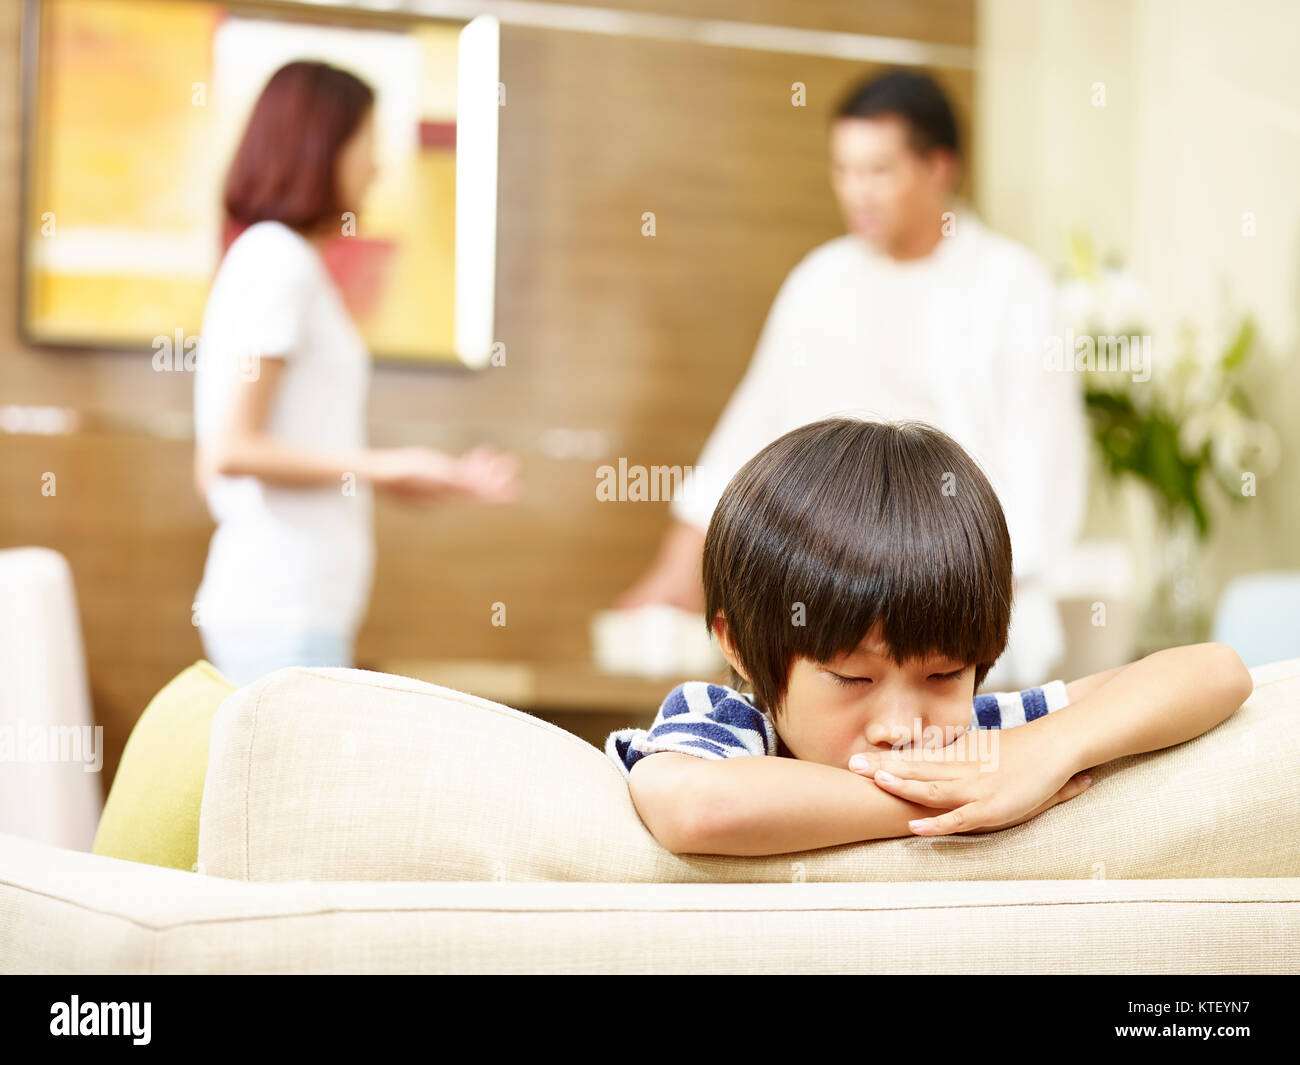 asian child appears sad and unhappy while parents quarreling in the background. Stock Photo